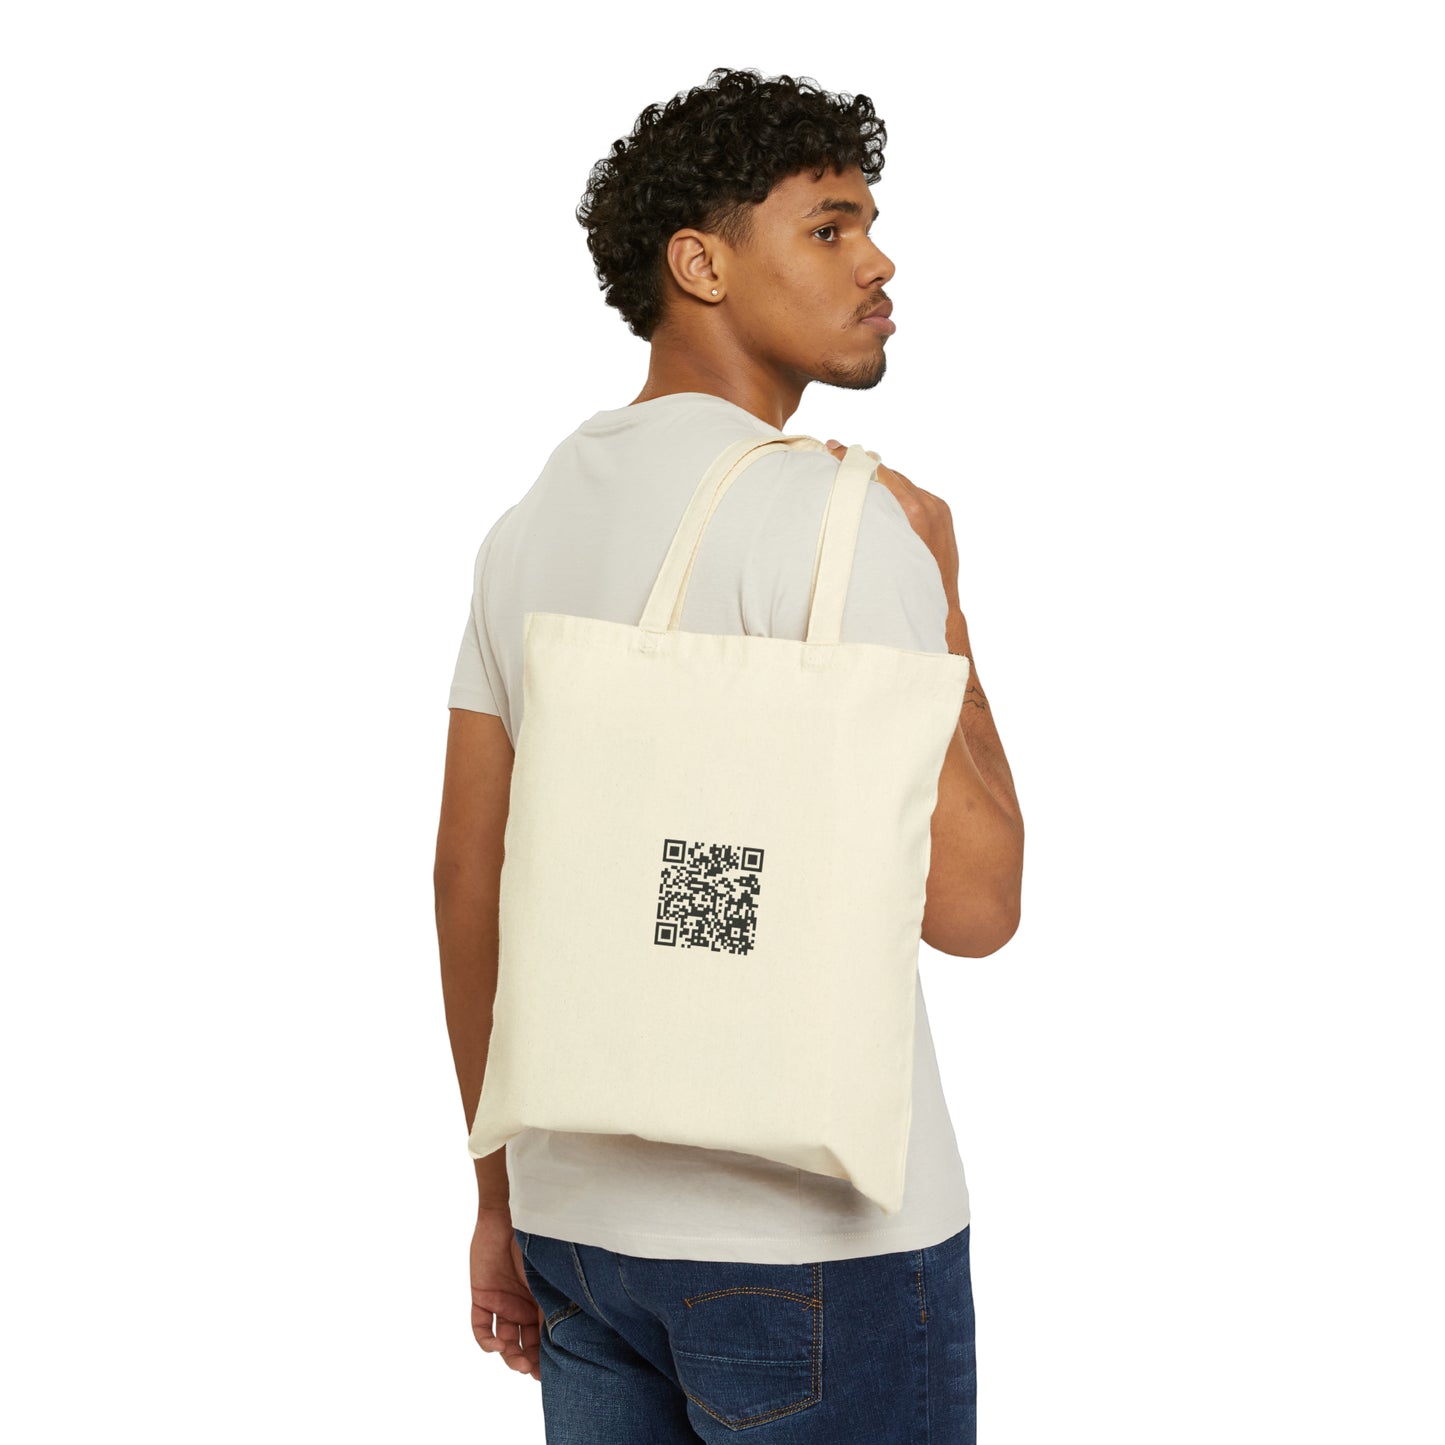 Acting Up - Cotton Canvas Tote Bag